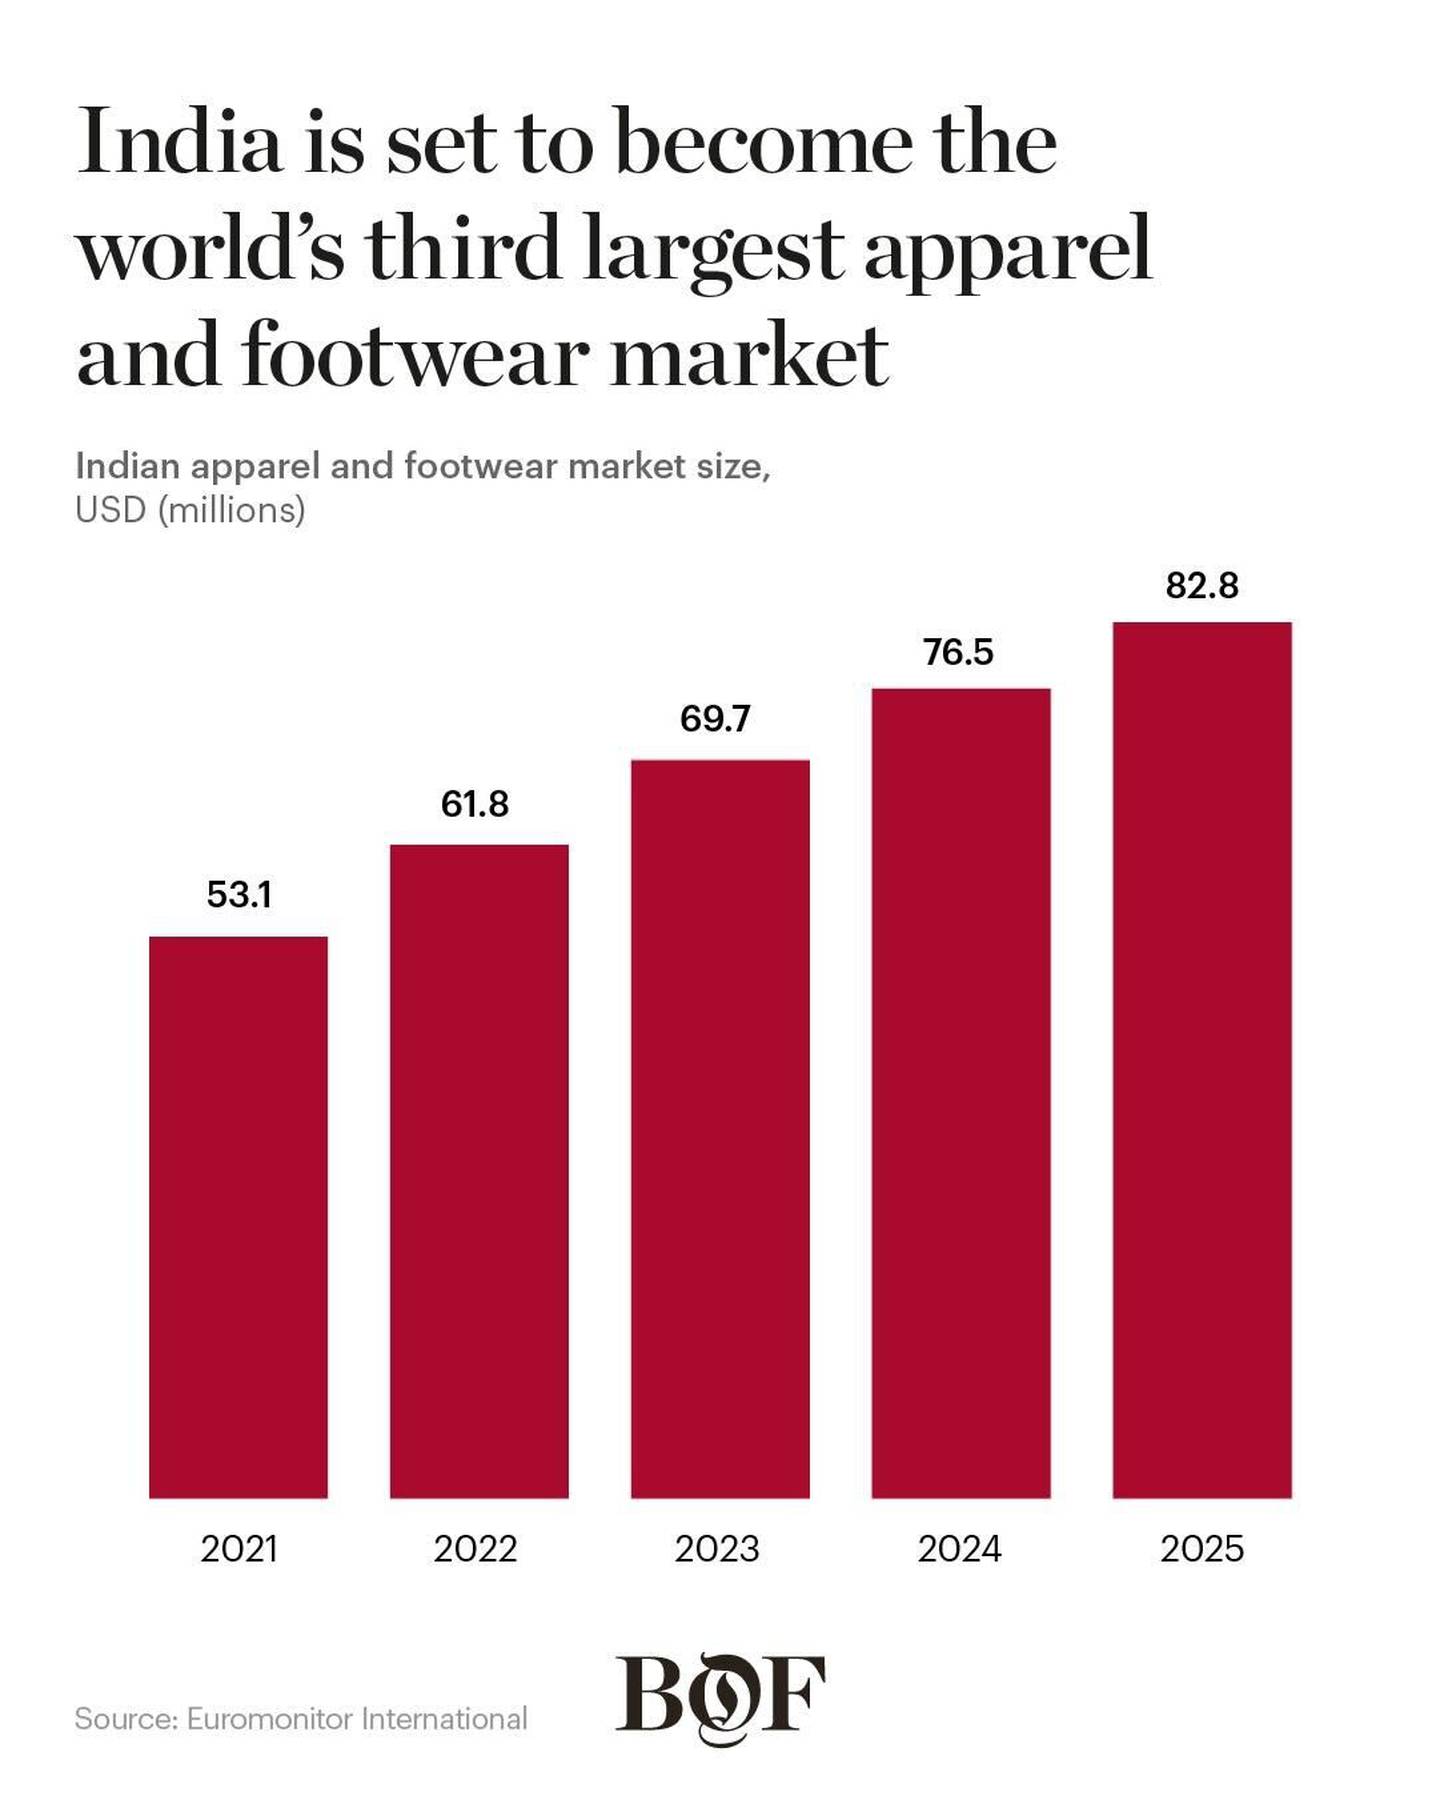 India is set to become the world's third-largest apparel and footwear market.